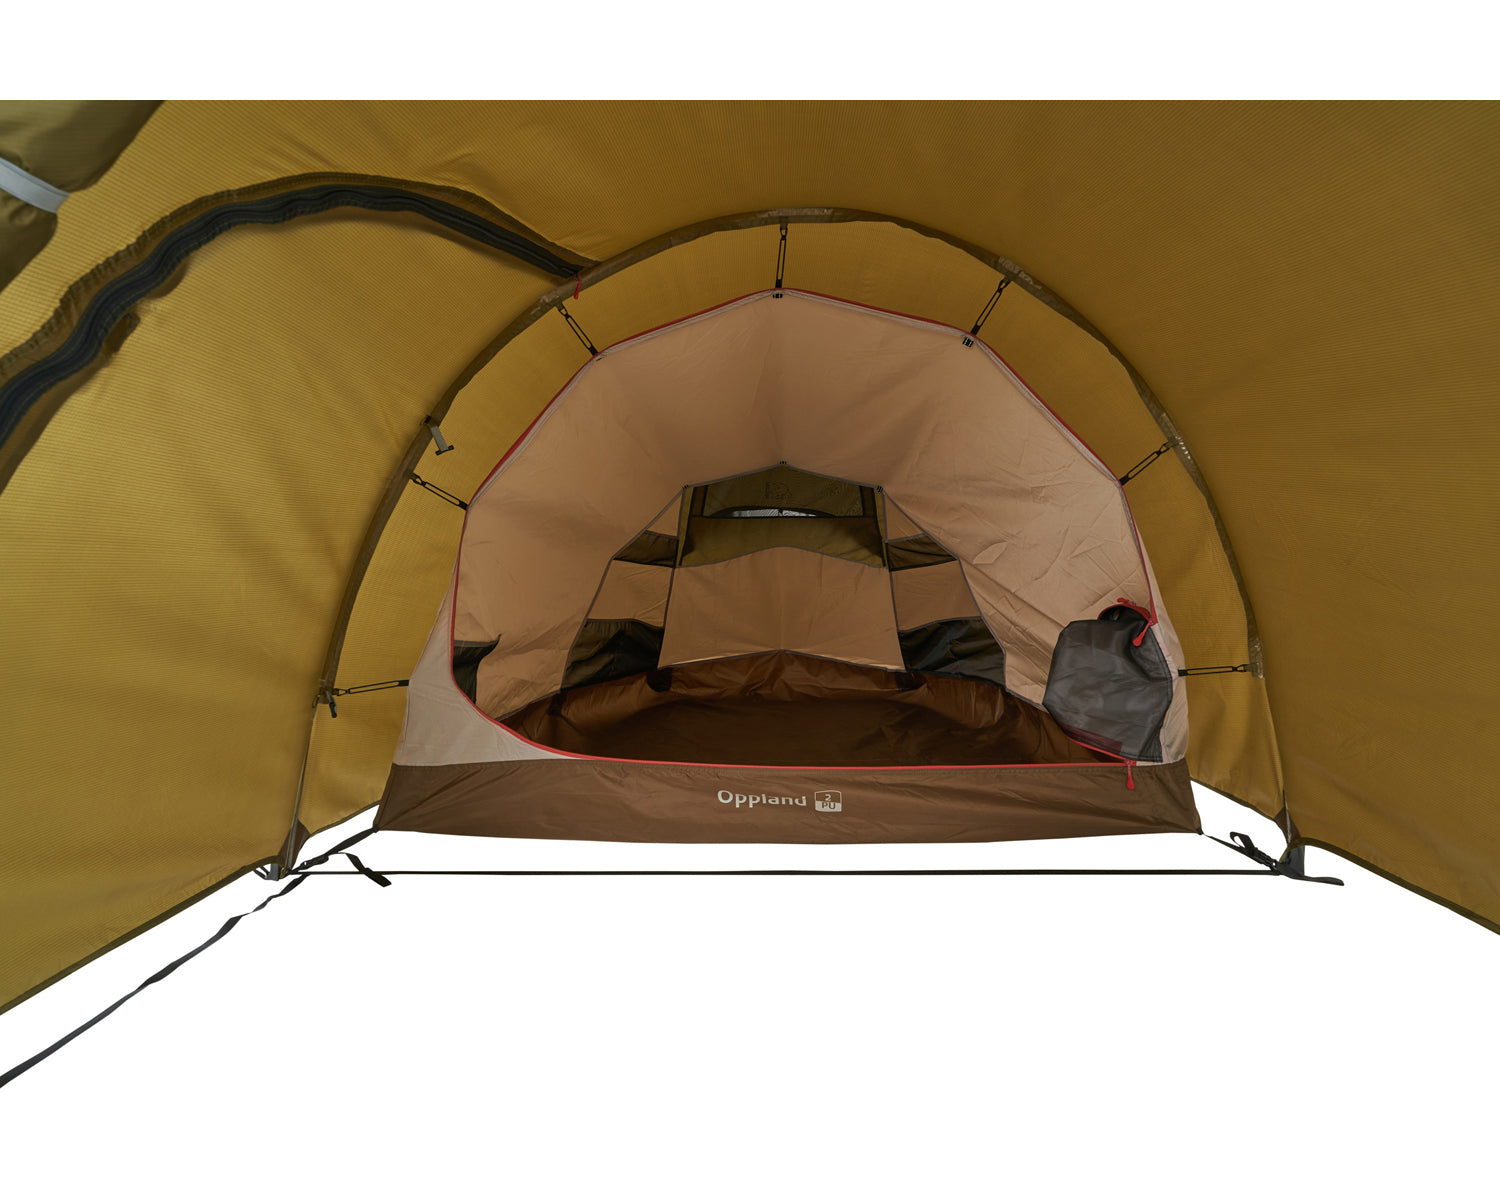 Oppland 2 PU (2.0) tent - 2 person - Dark Olive